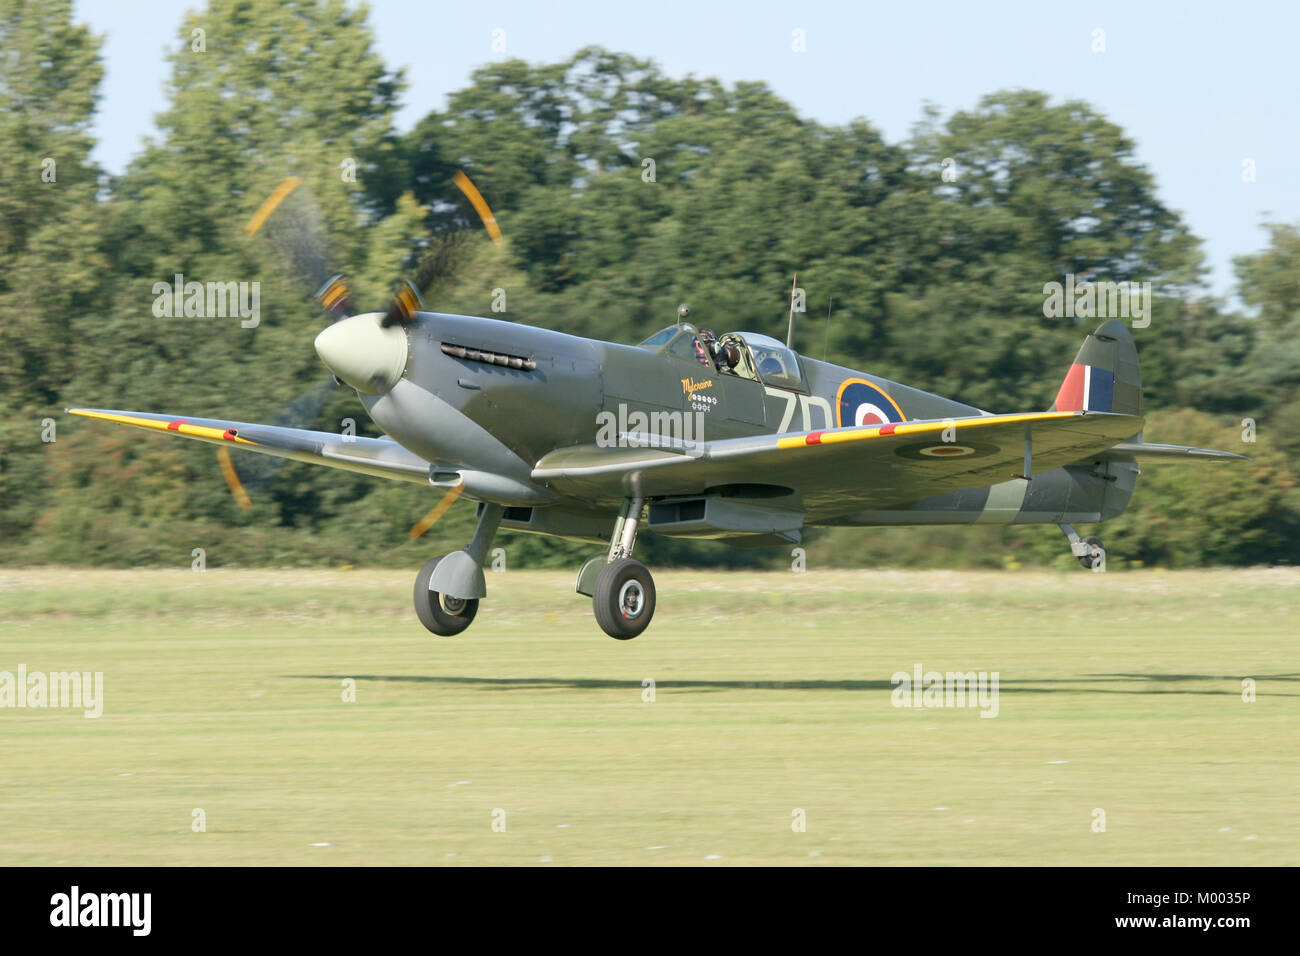 The Old Flying Machine Companies vintage MkIX Supermarine Spitfire taking off during a air display at the historic old airfield of Rougham, Suffolk. Stock Photo